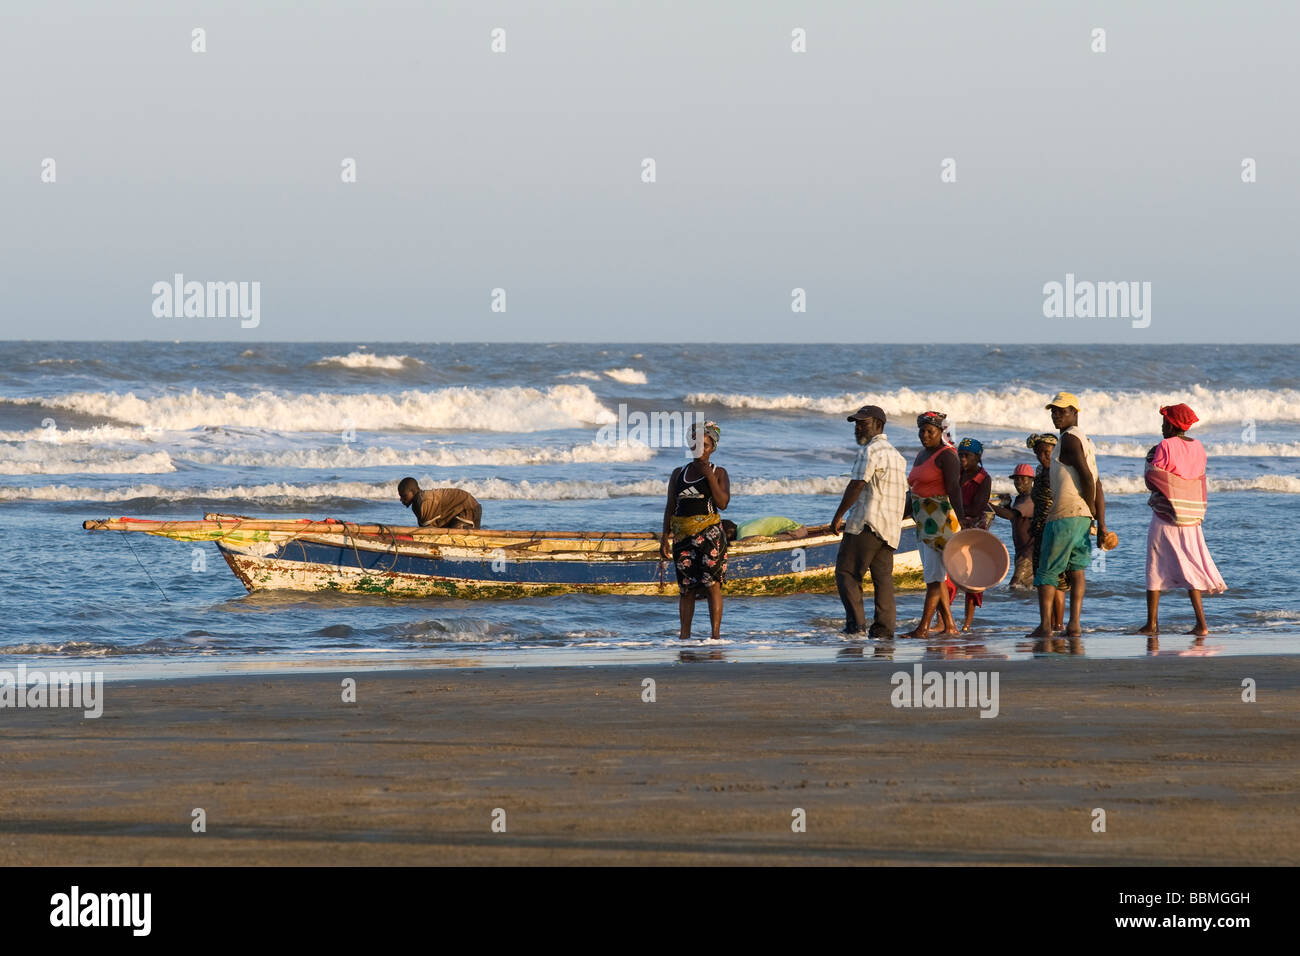 People buying fresh fish on the beach Quelimane Mozambique Stock Photo